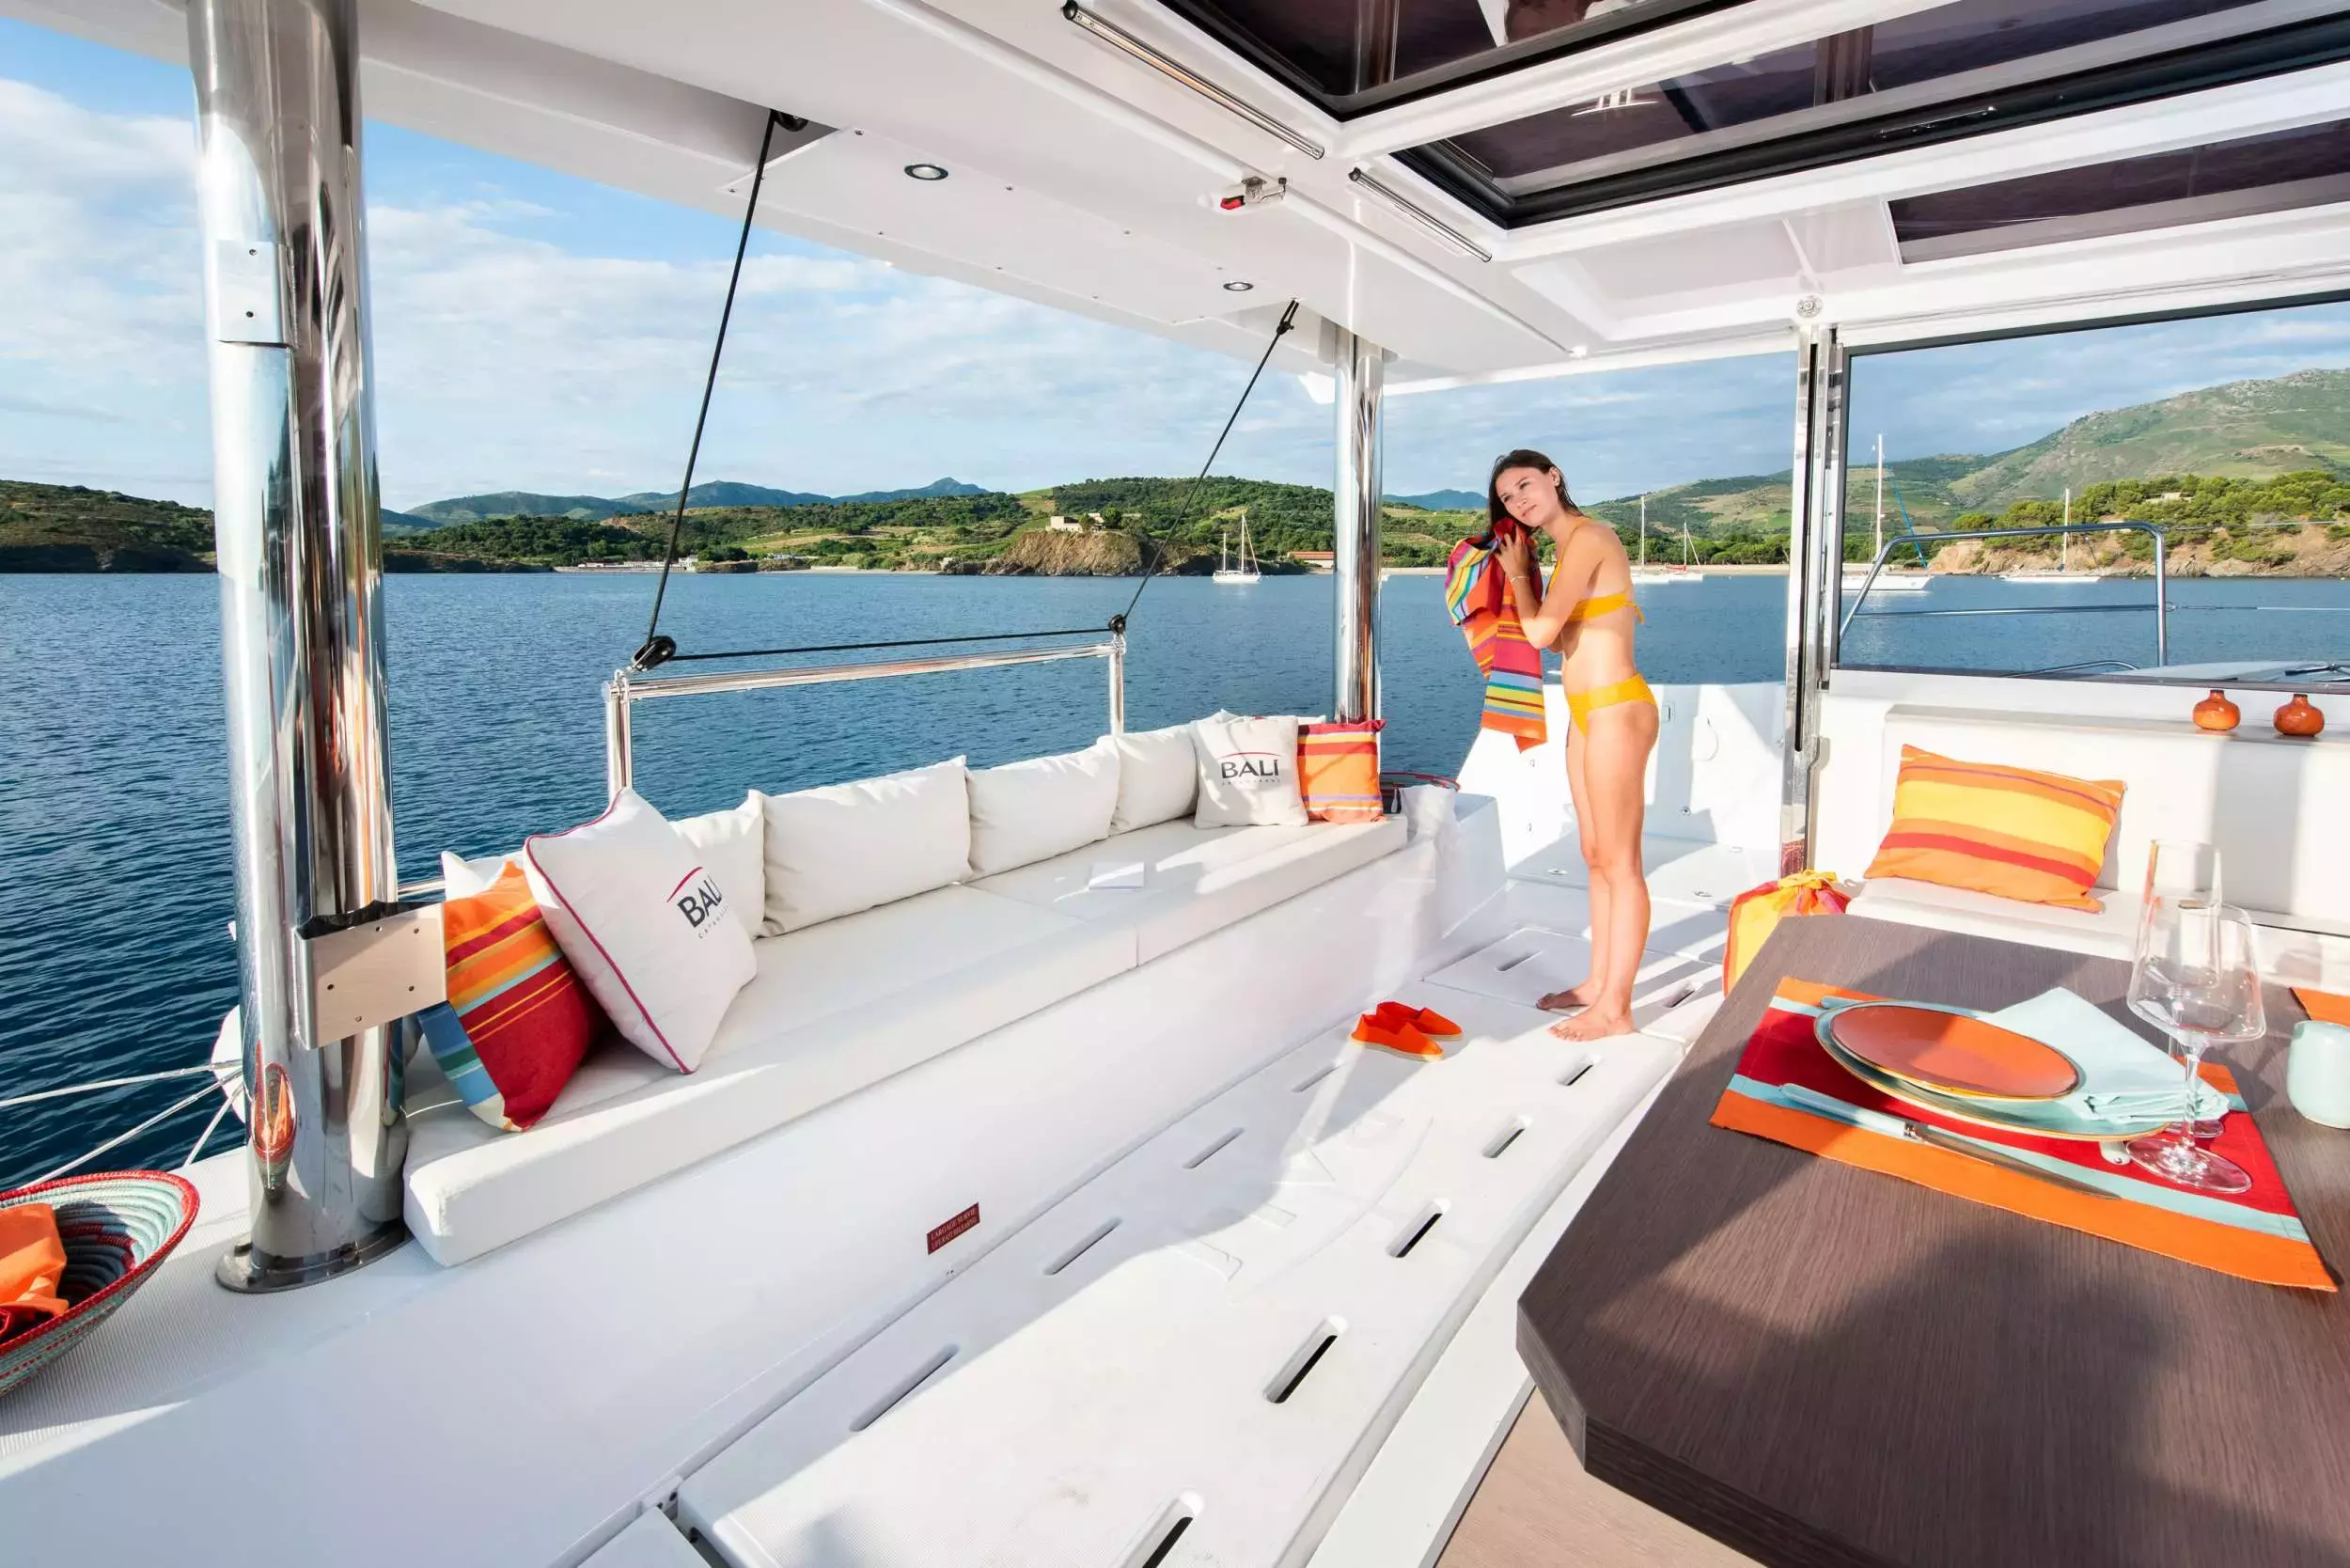 Yemaya by Bali Catamarans - Special Offer for a private Sailing Catamaran Rental in Ibiza with a crew